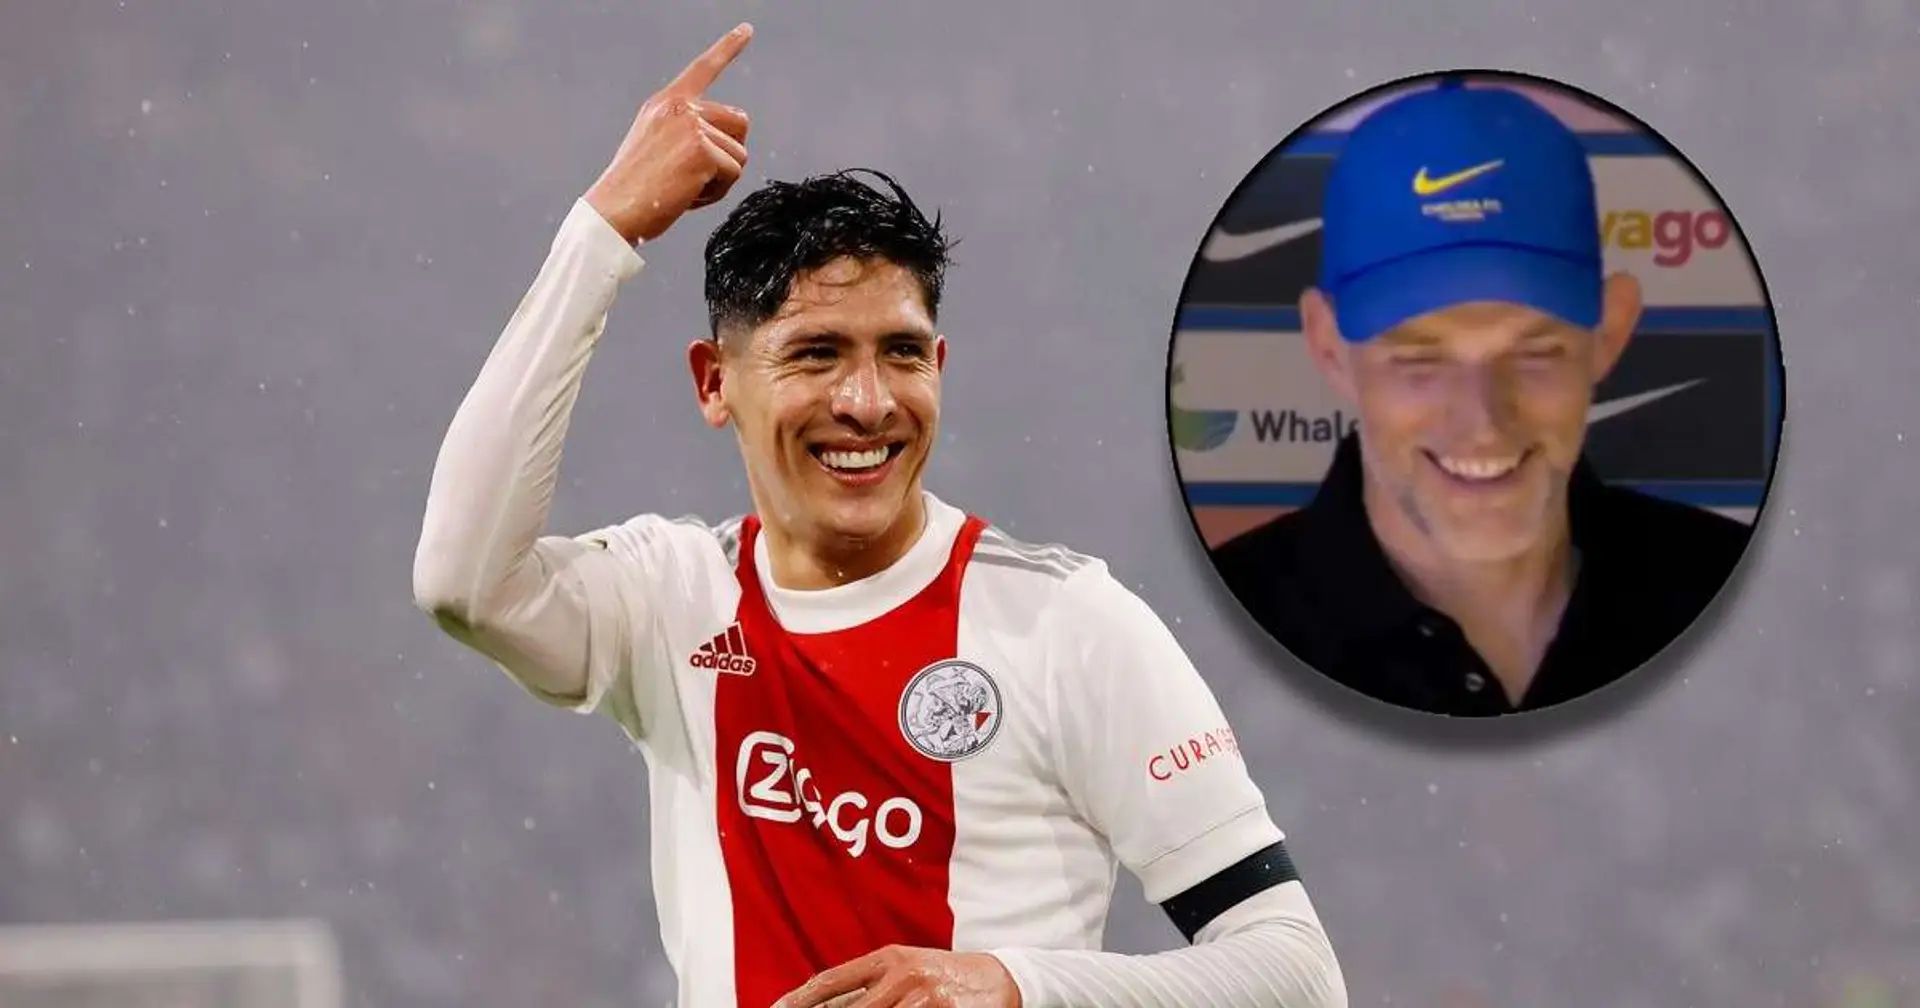 Edson Alvarez tells Ajax he wants to leave for Chelsea, misses training in order to force move: Multiple sources